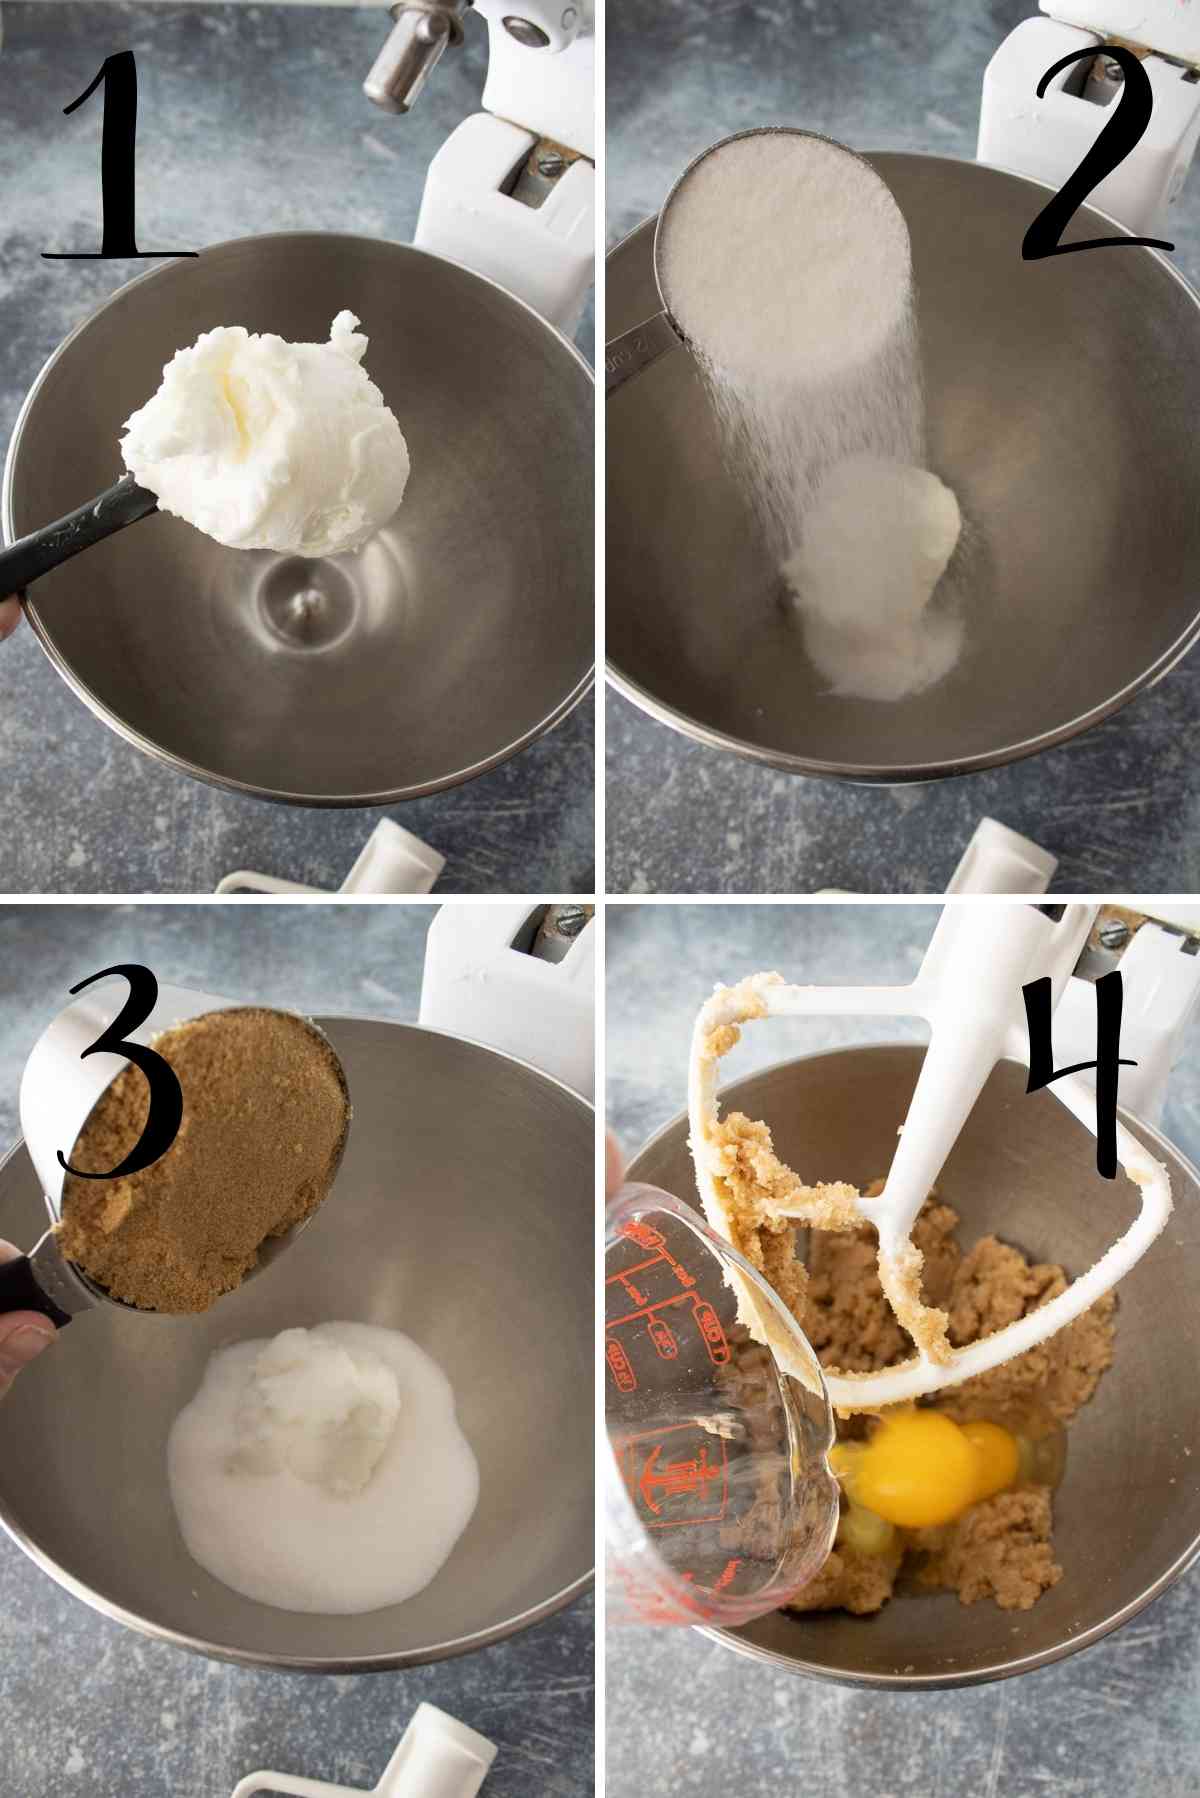 Shortening, sugars, eggs, water and vanilla added to a mixing bowl.